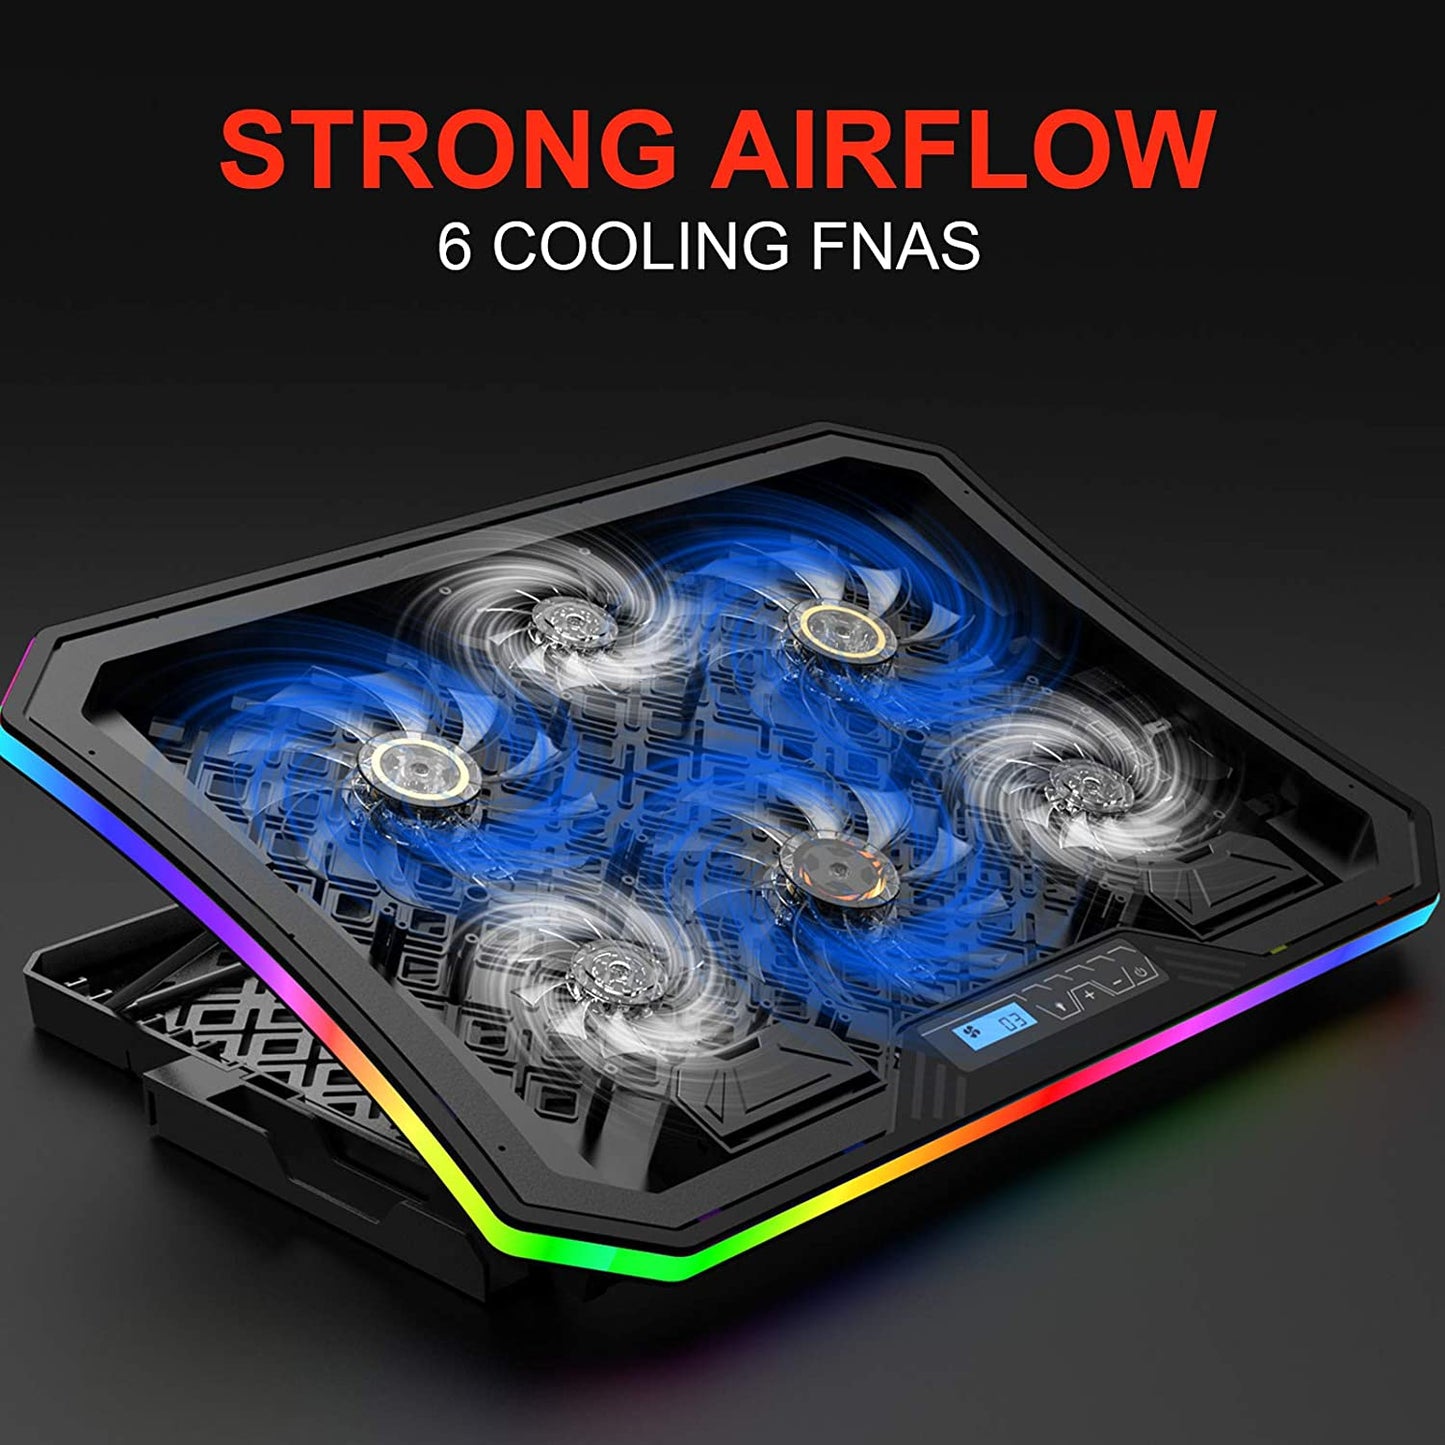 Laptop Cooler Pad RGB Lights with 6 Cooling Fans for 15.6-17.3 Inch Laptops 7 Height Stands 10 Modes 2 USB Ports in Right Side Desk or Lap Use